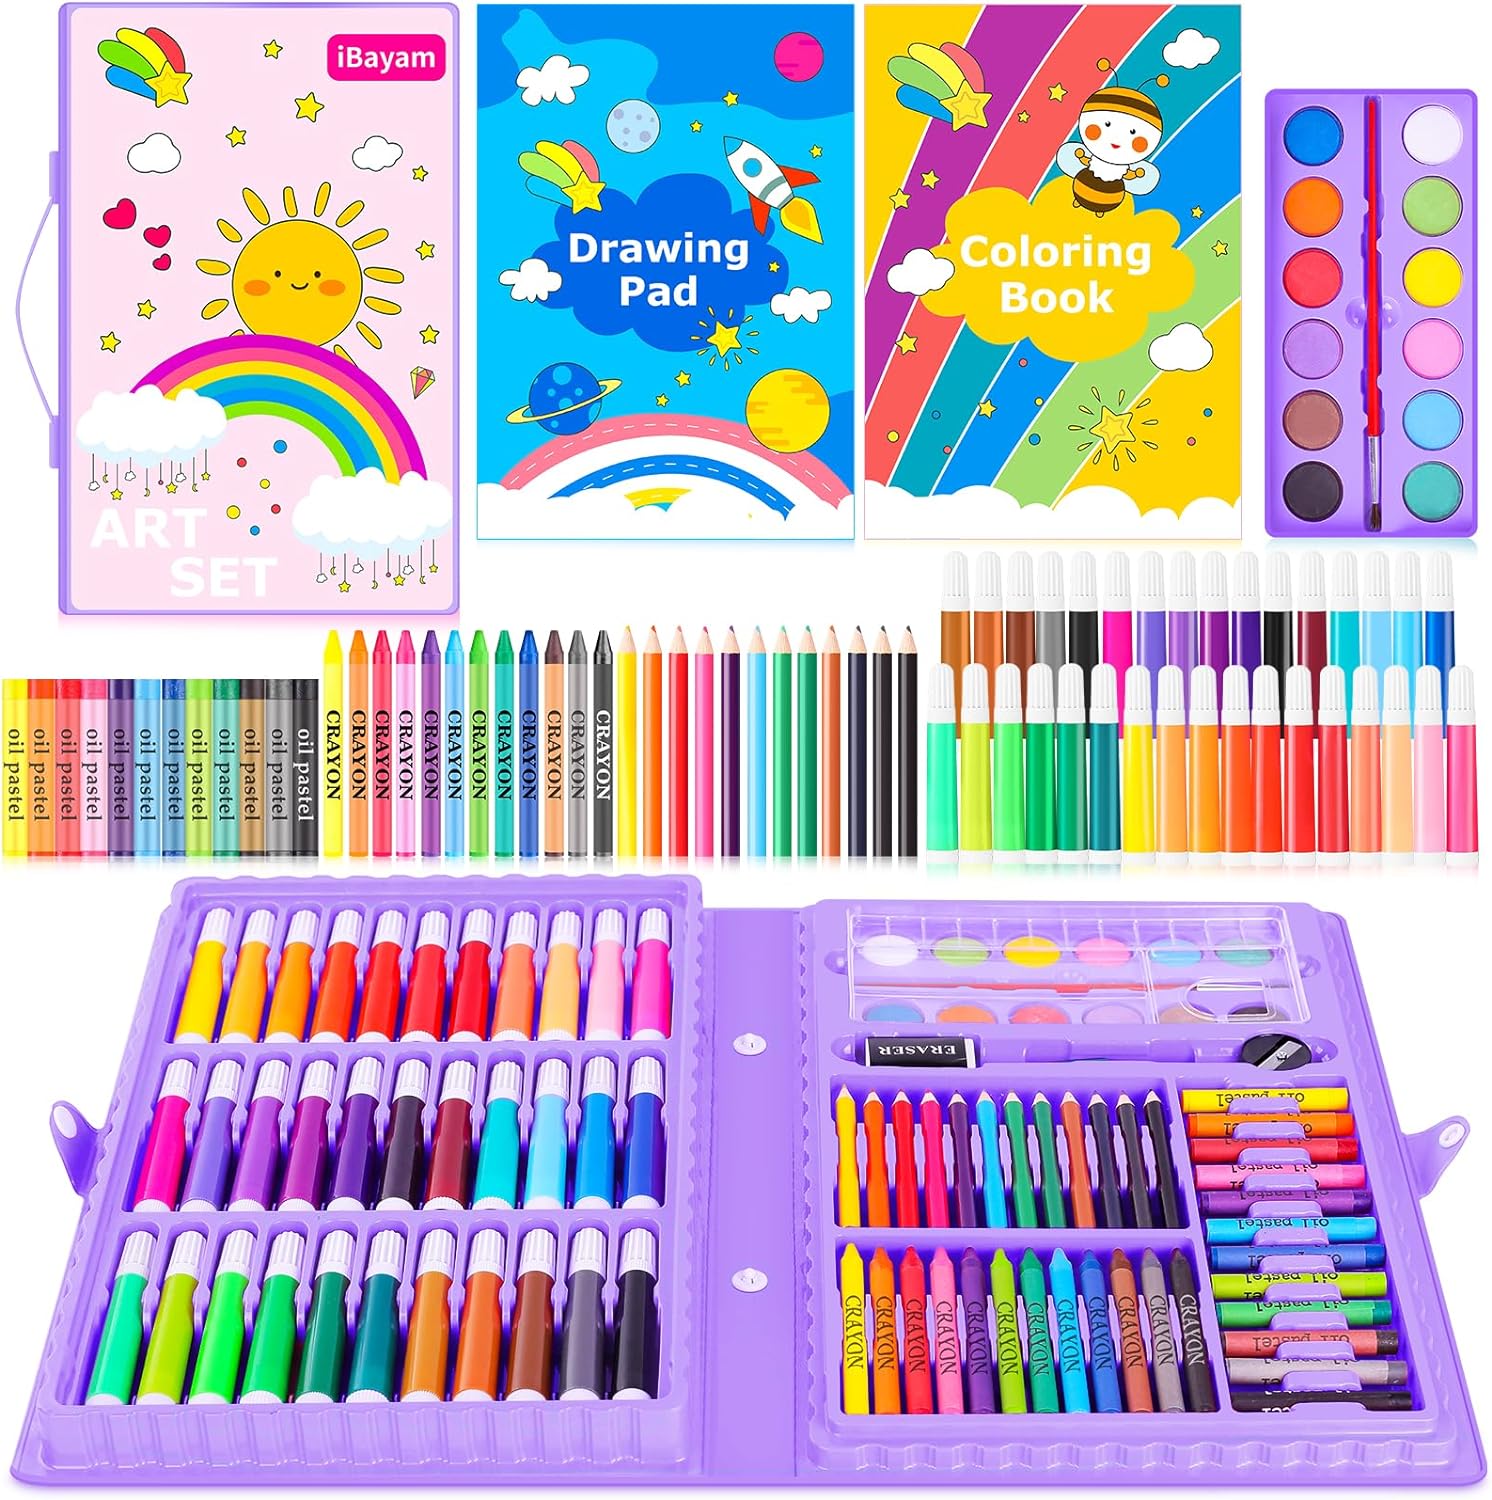 The amount of products in this set was amazing for the price! So many different things to choose from, and so many arts and crafts to be created!